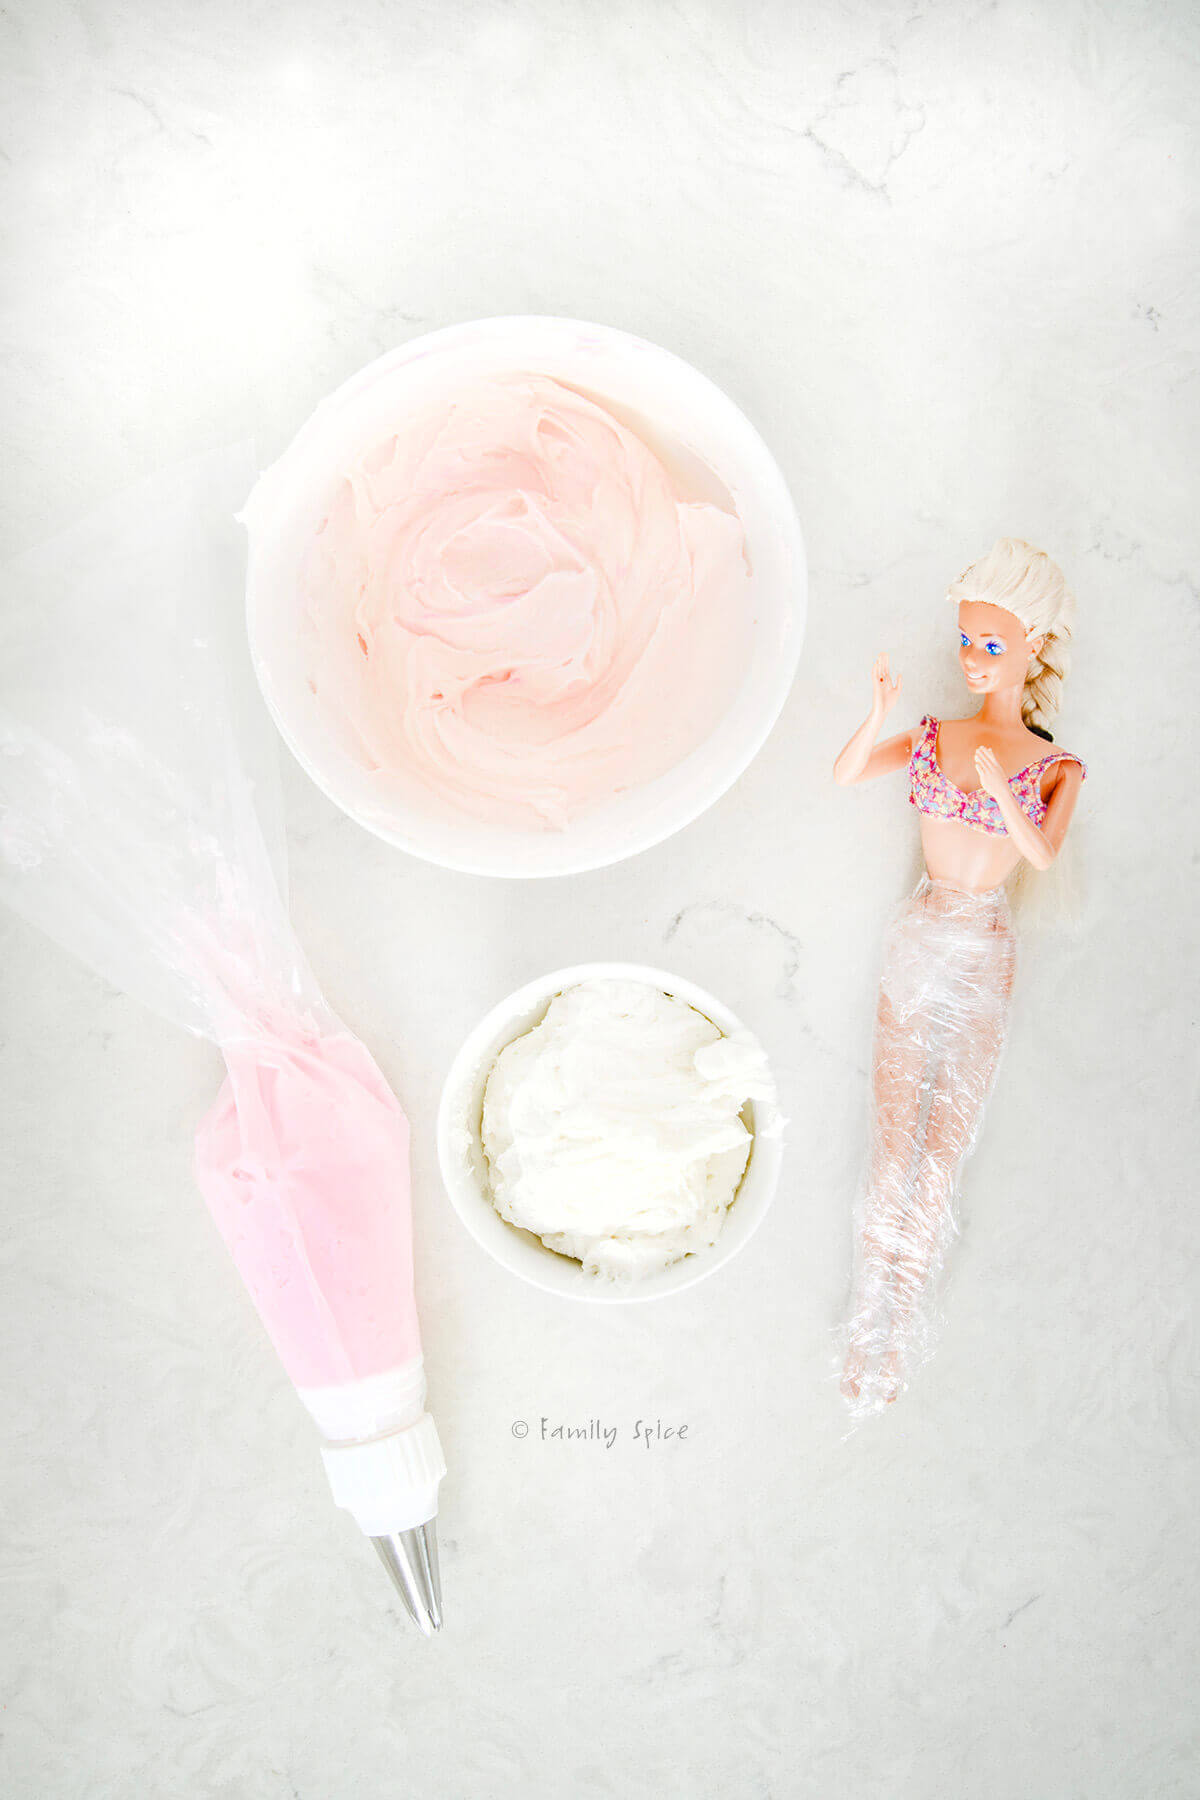 A bowl of light pink frosting, a smaller bowl of white frosting, a piping bag with dark pink buttercream frosting and a barbie with legs wrapped in plastic wrap